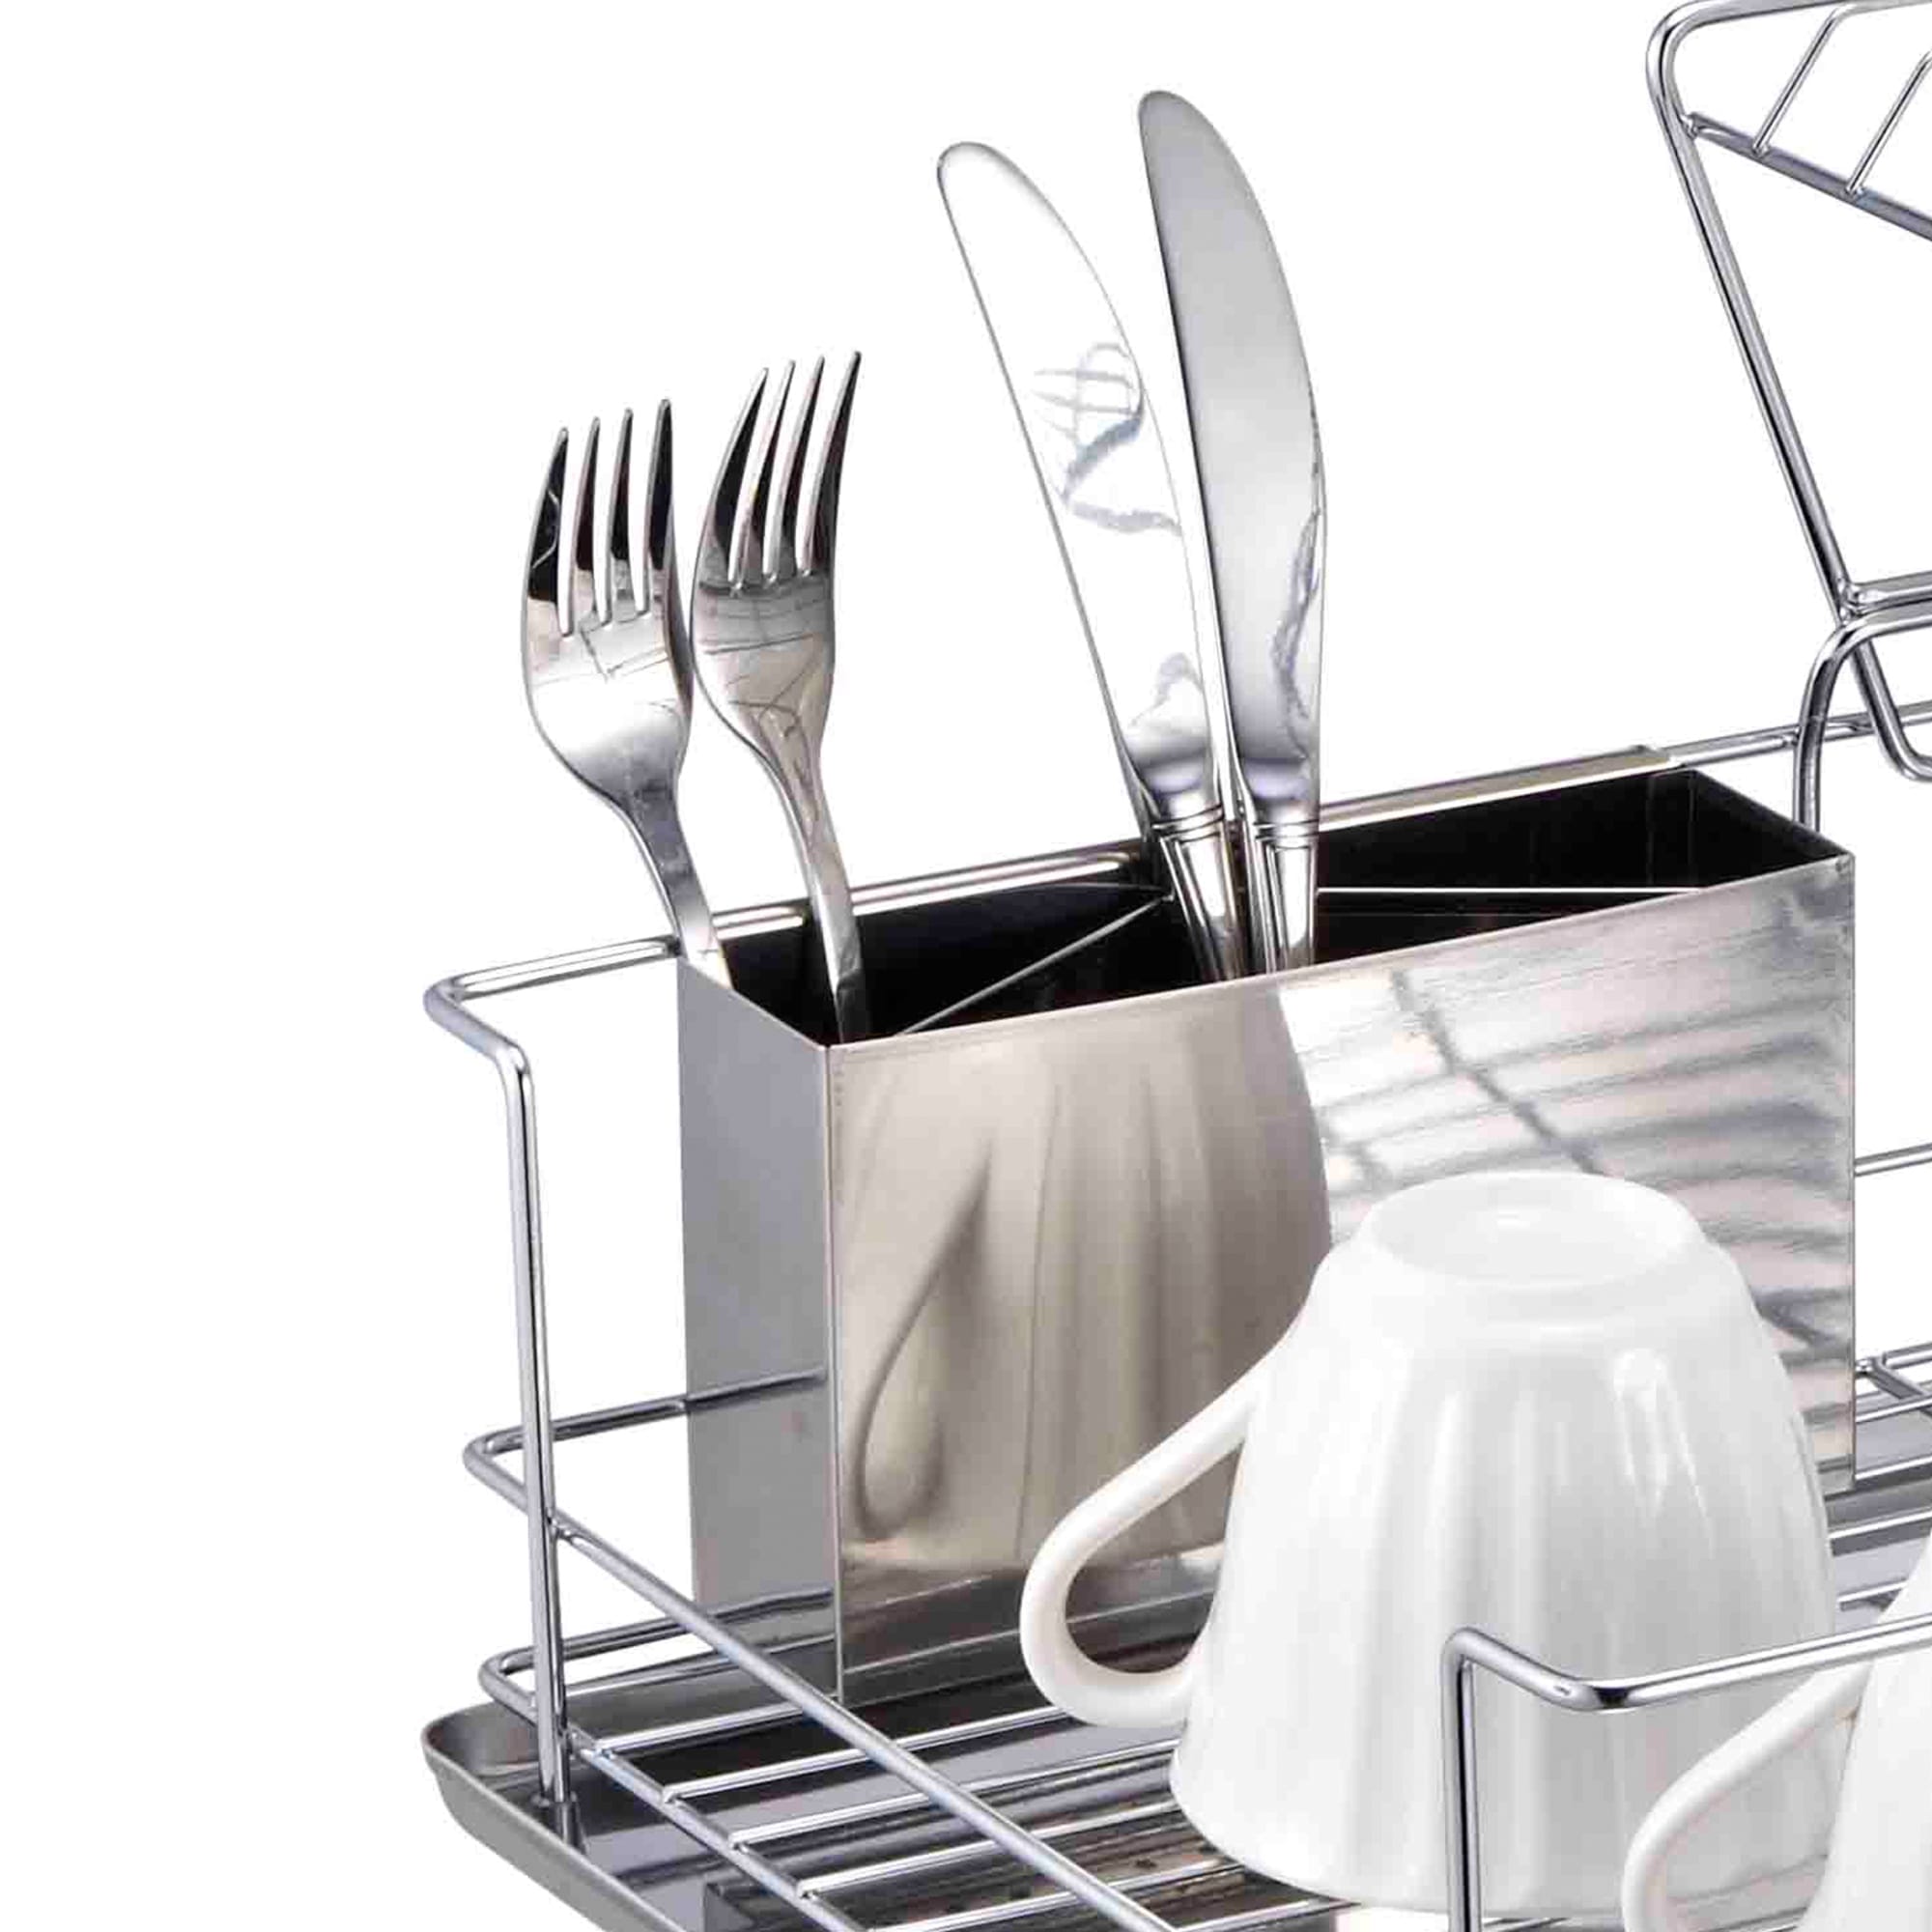 Home Basics 2-Tier 3 Piece Steel Dish Drainer $25.00 EACH, CASE PACK OF 6